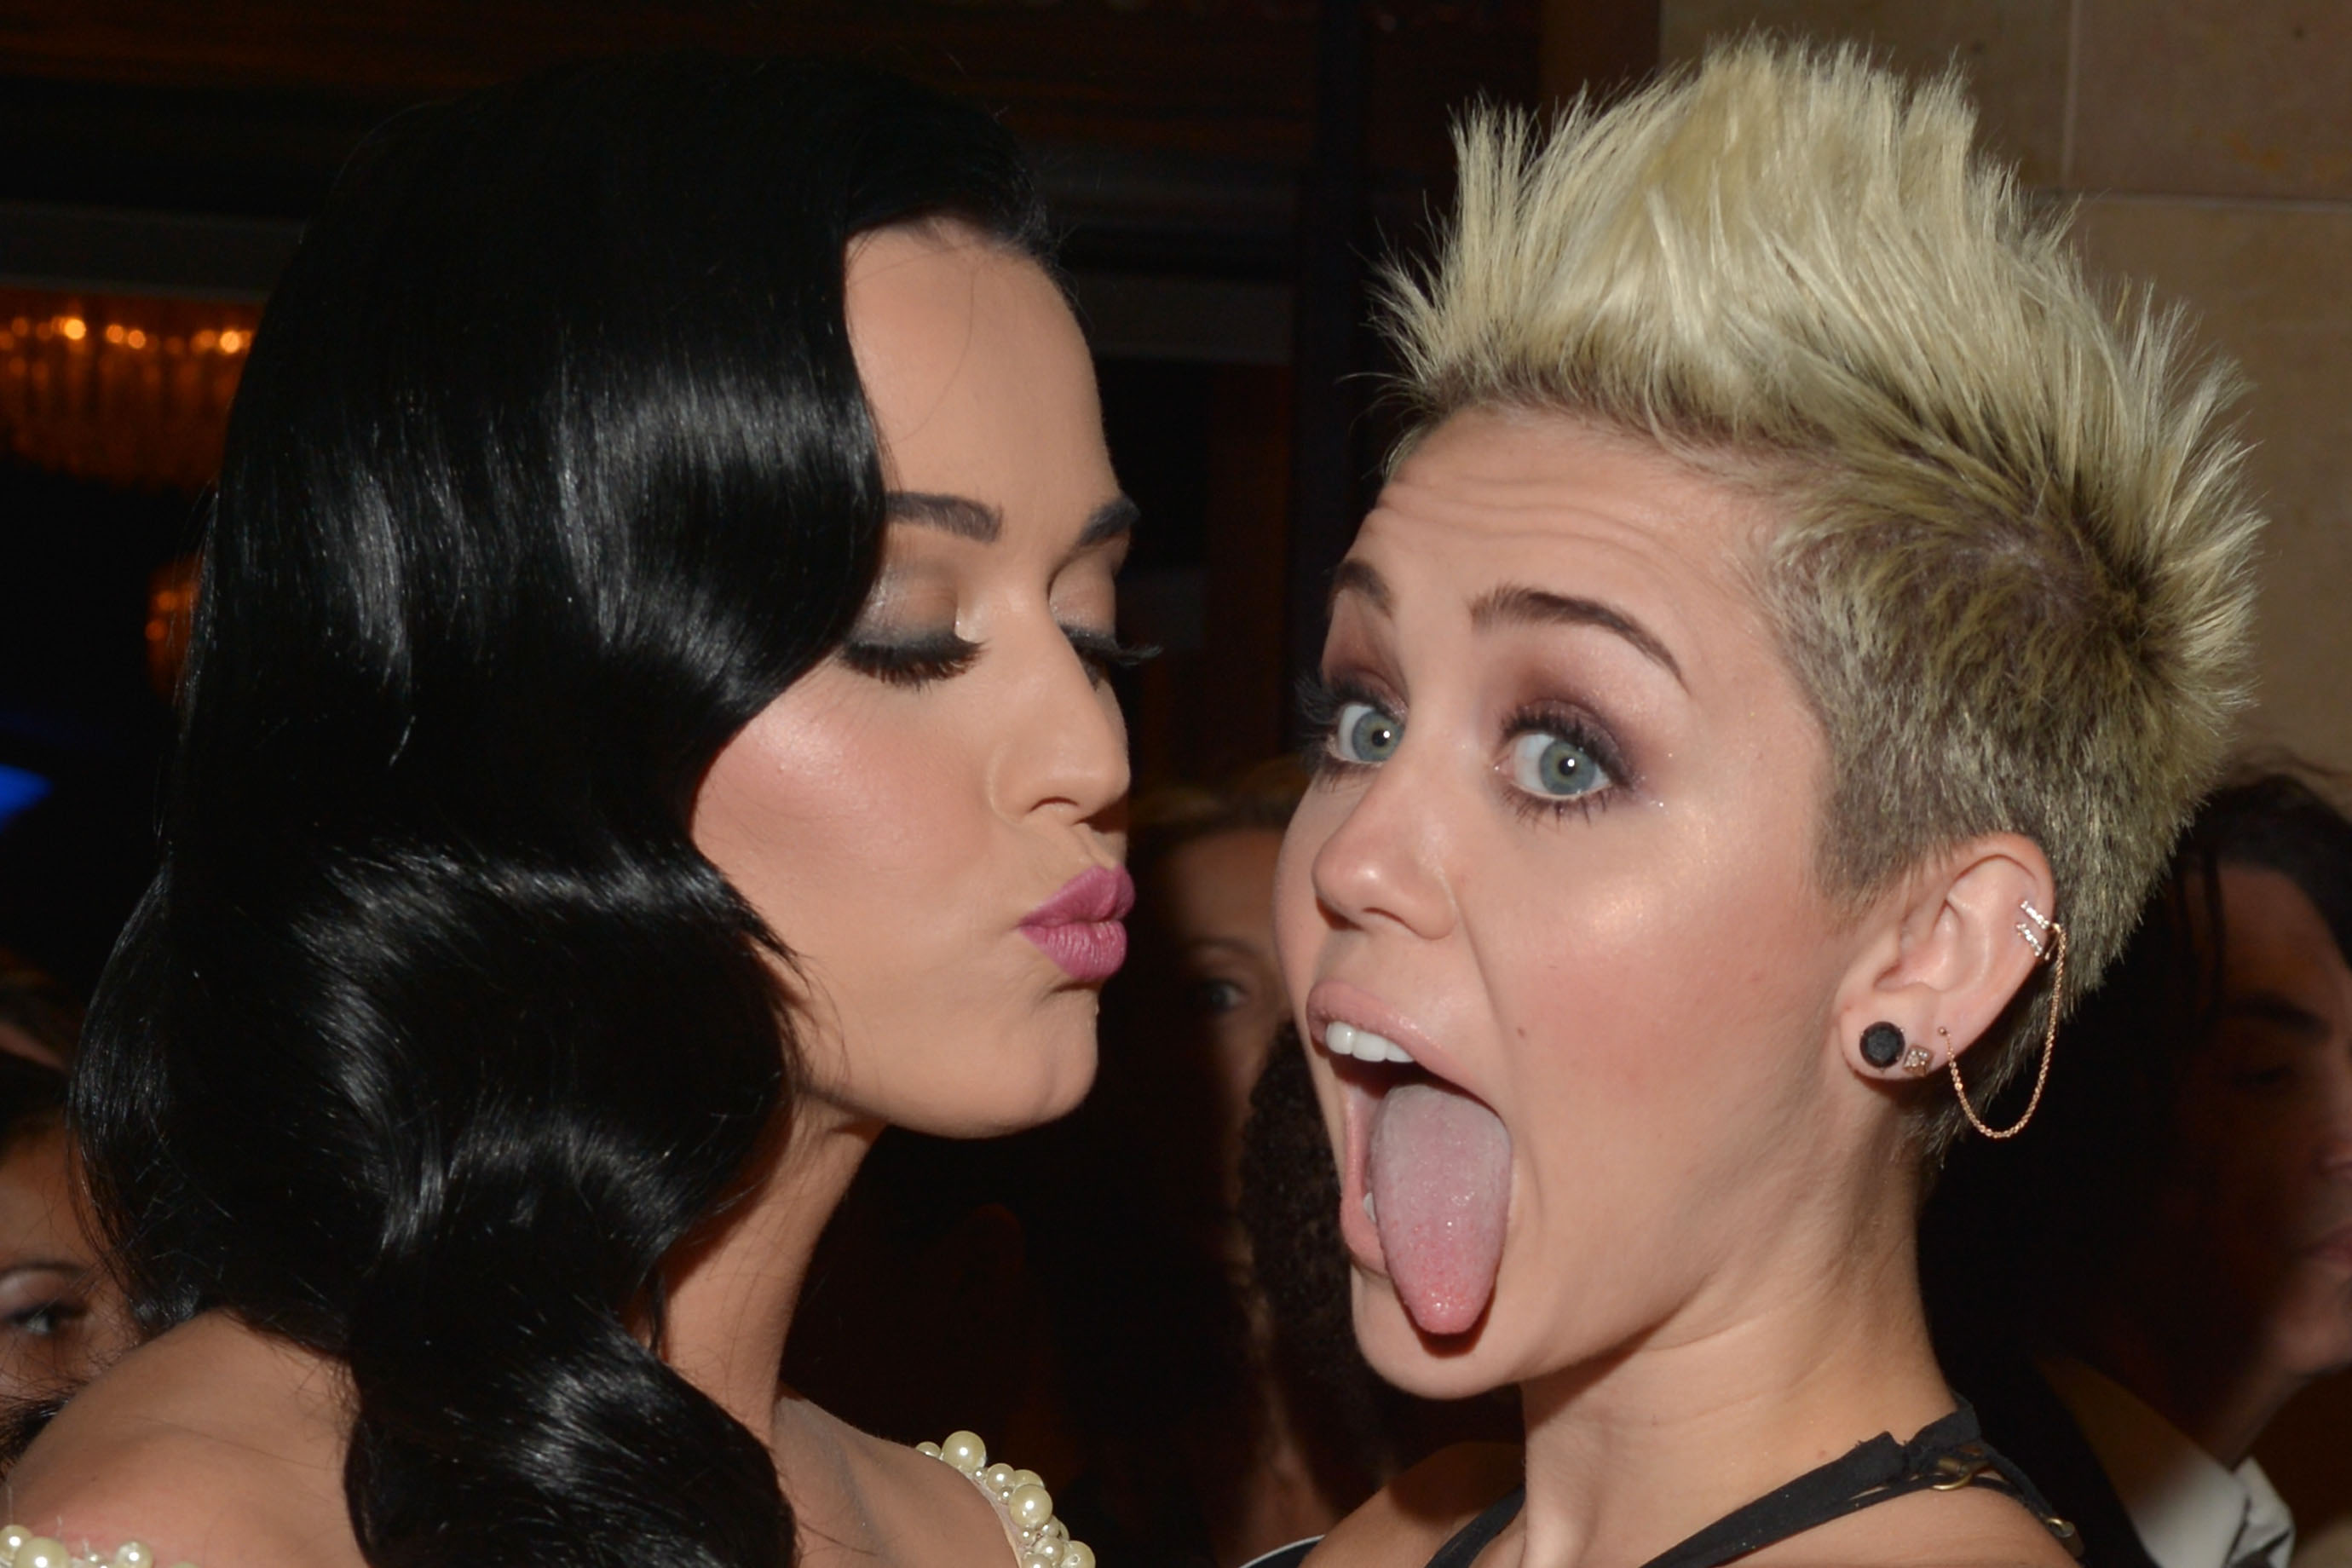 Perry didn't seem to mind Cyrus' tongue too much at the 2013 Grammy's (Lester Cohen&mdash;WireImage)